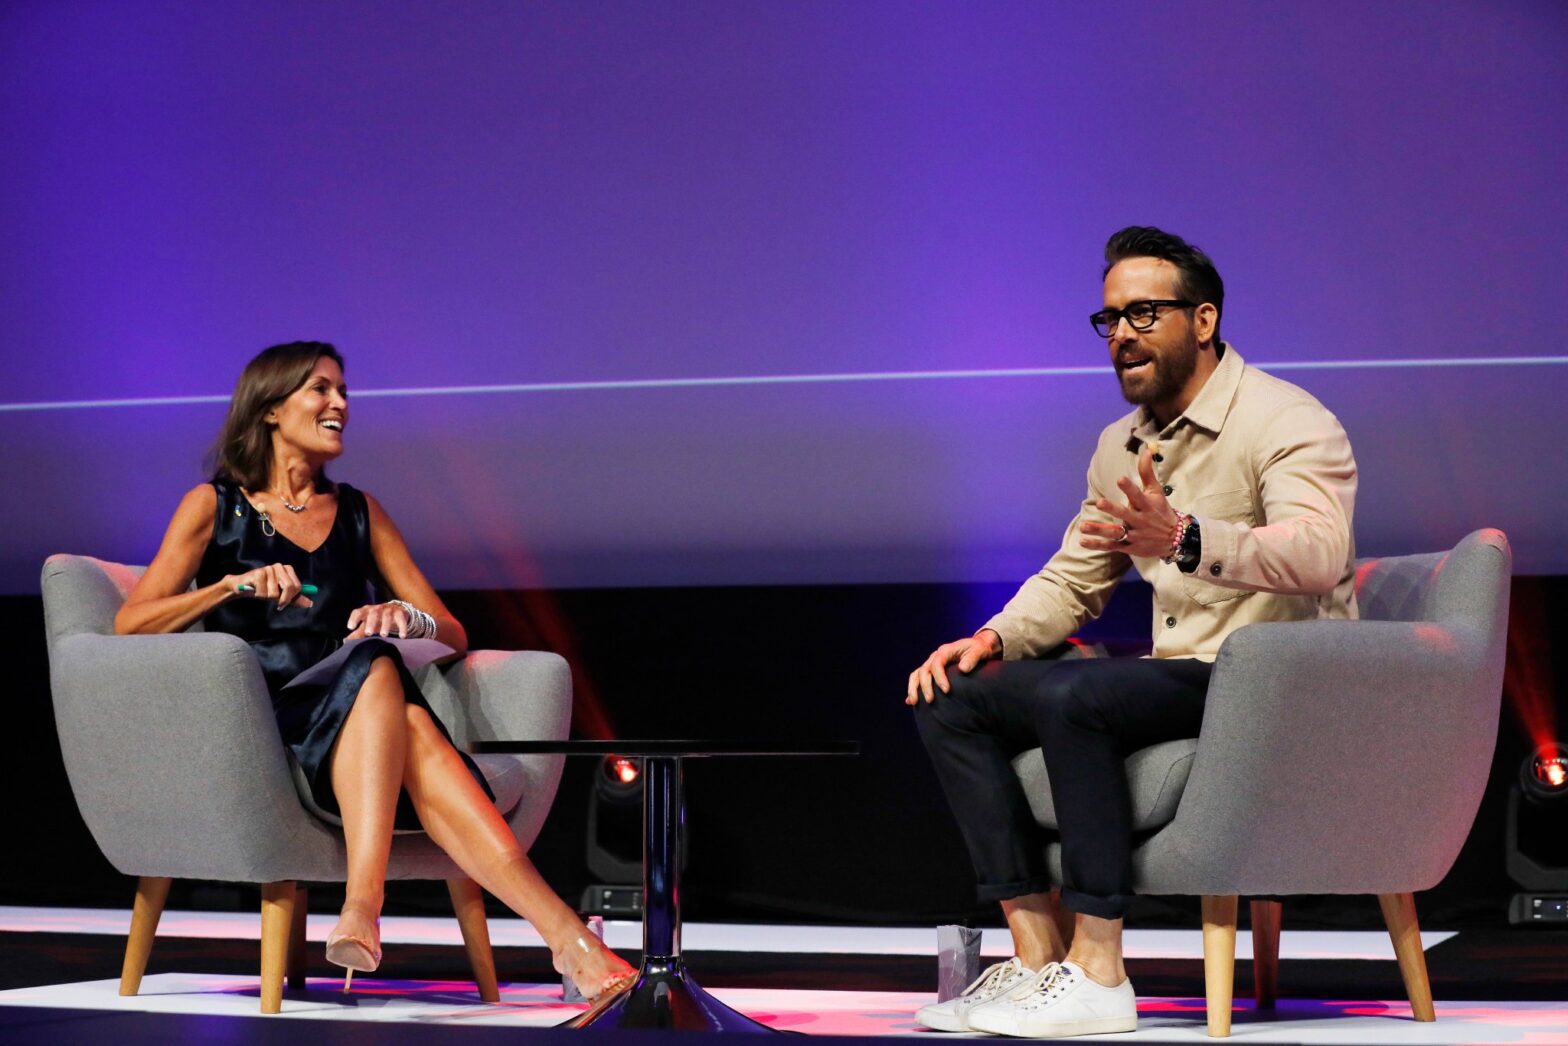 9 things we learned from Ryan Reynolds at Cannes Lions